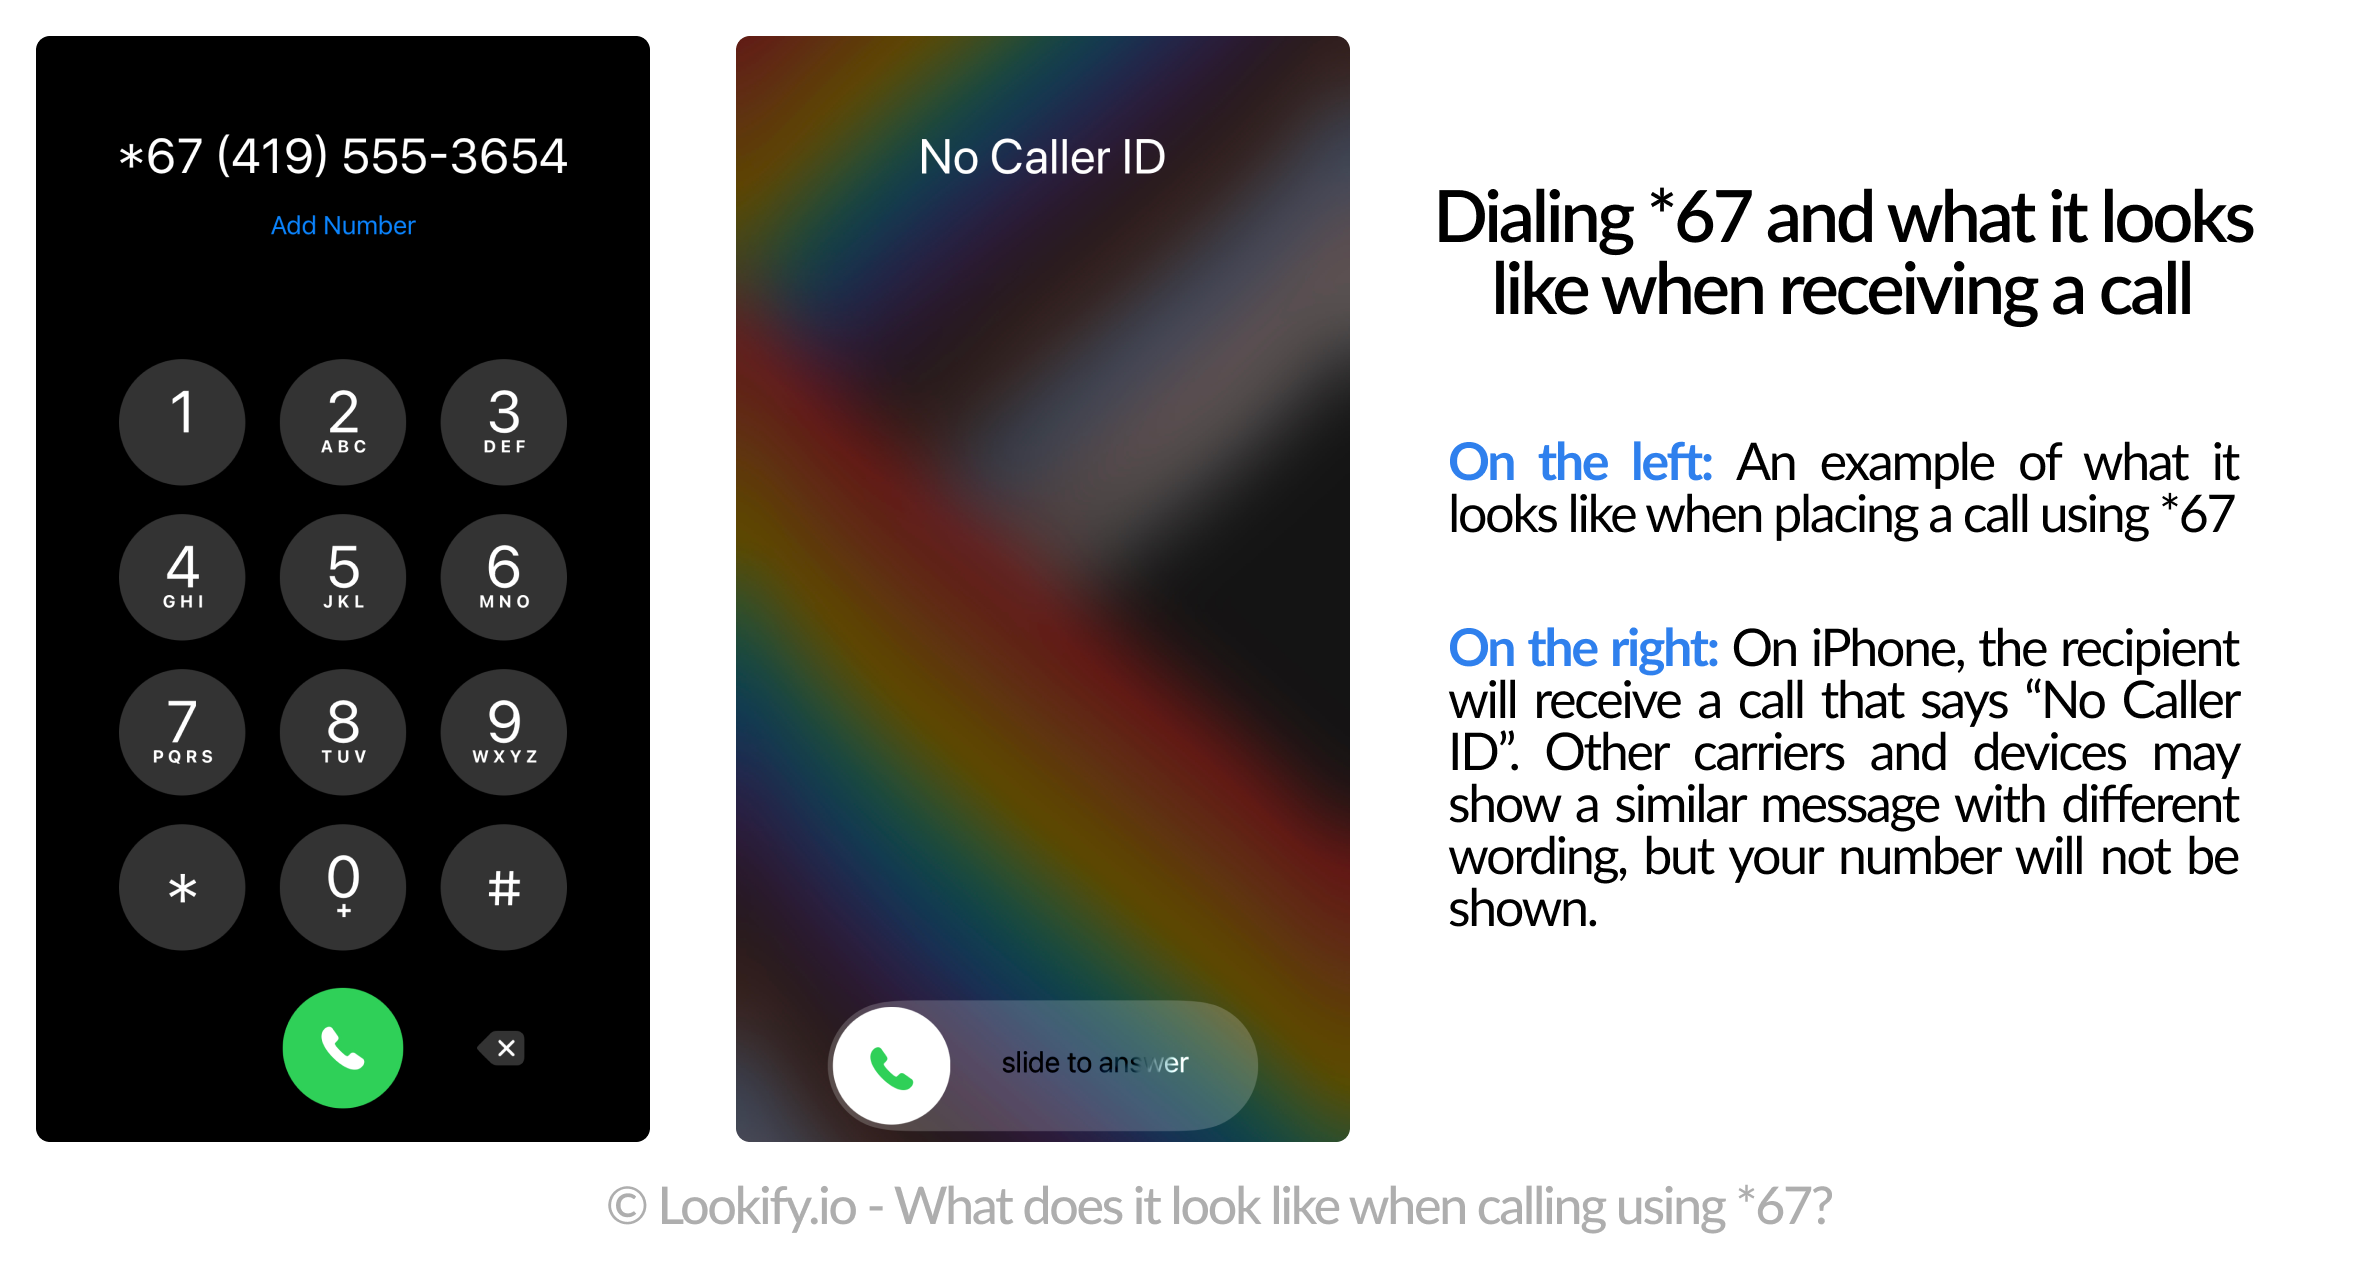 A photo showing what it looks like when dialing star 67 and how the call appears to the recipient